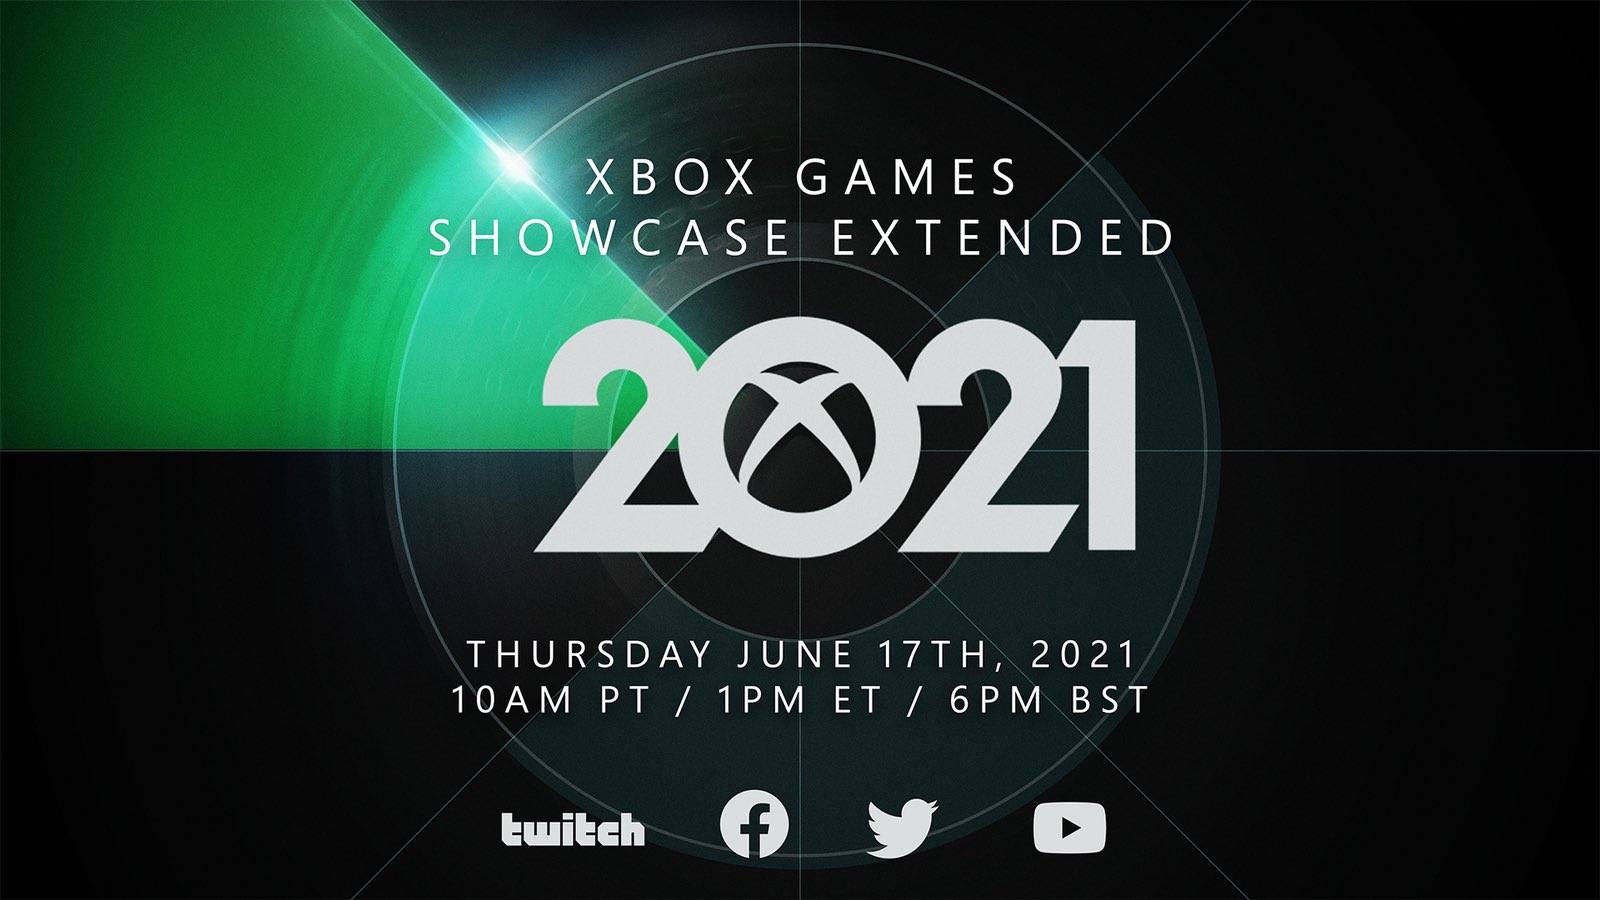 Xbox Games Extended Showcase